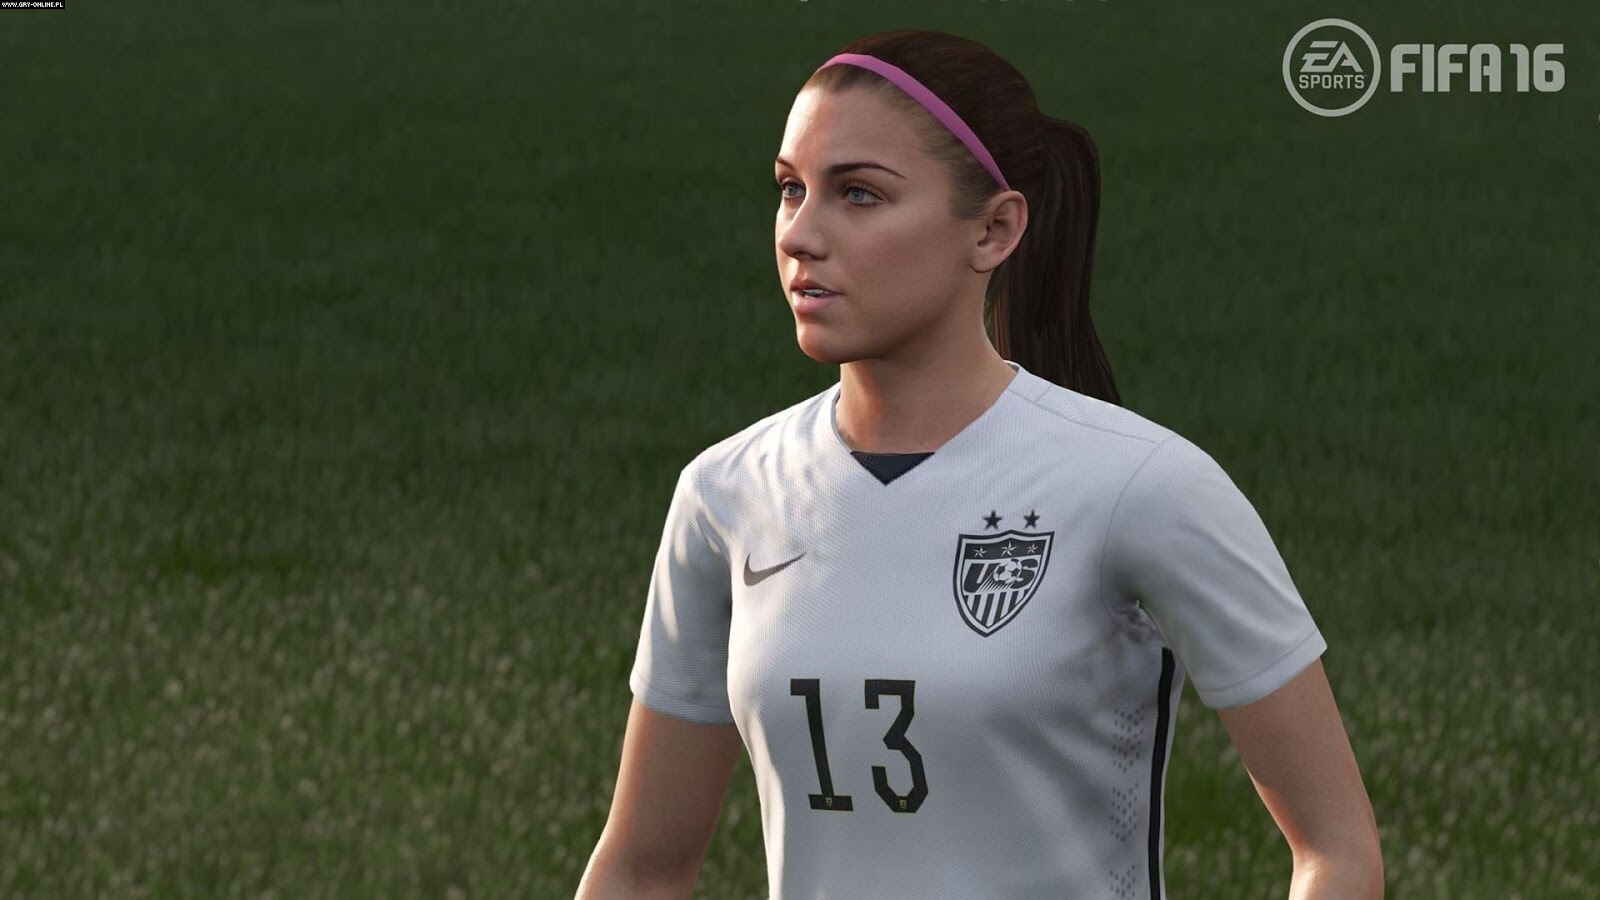 play fifa 16 online free